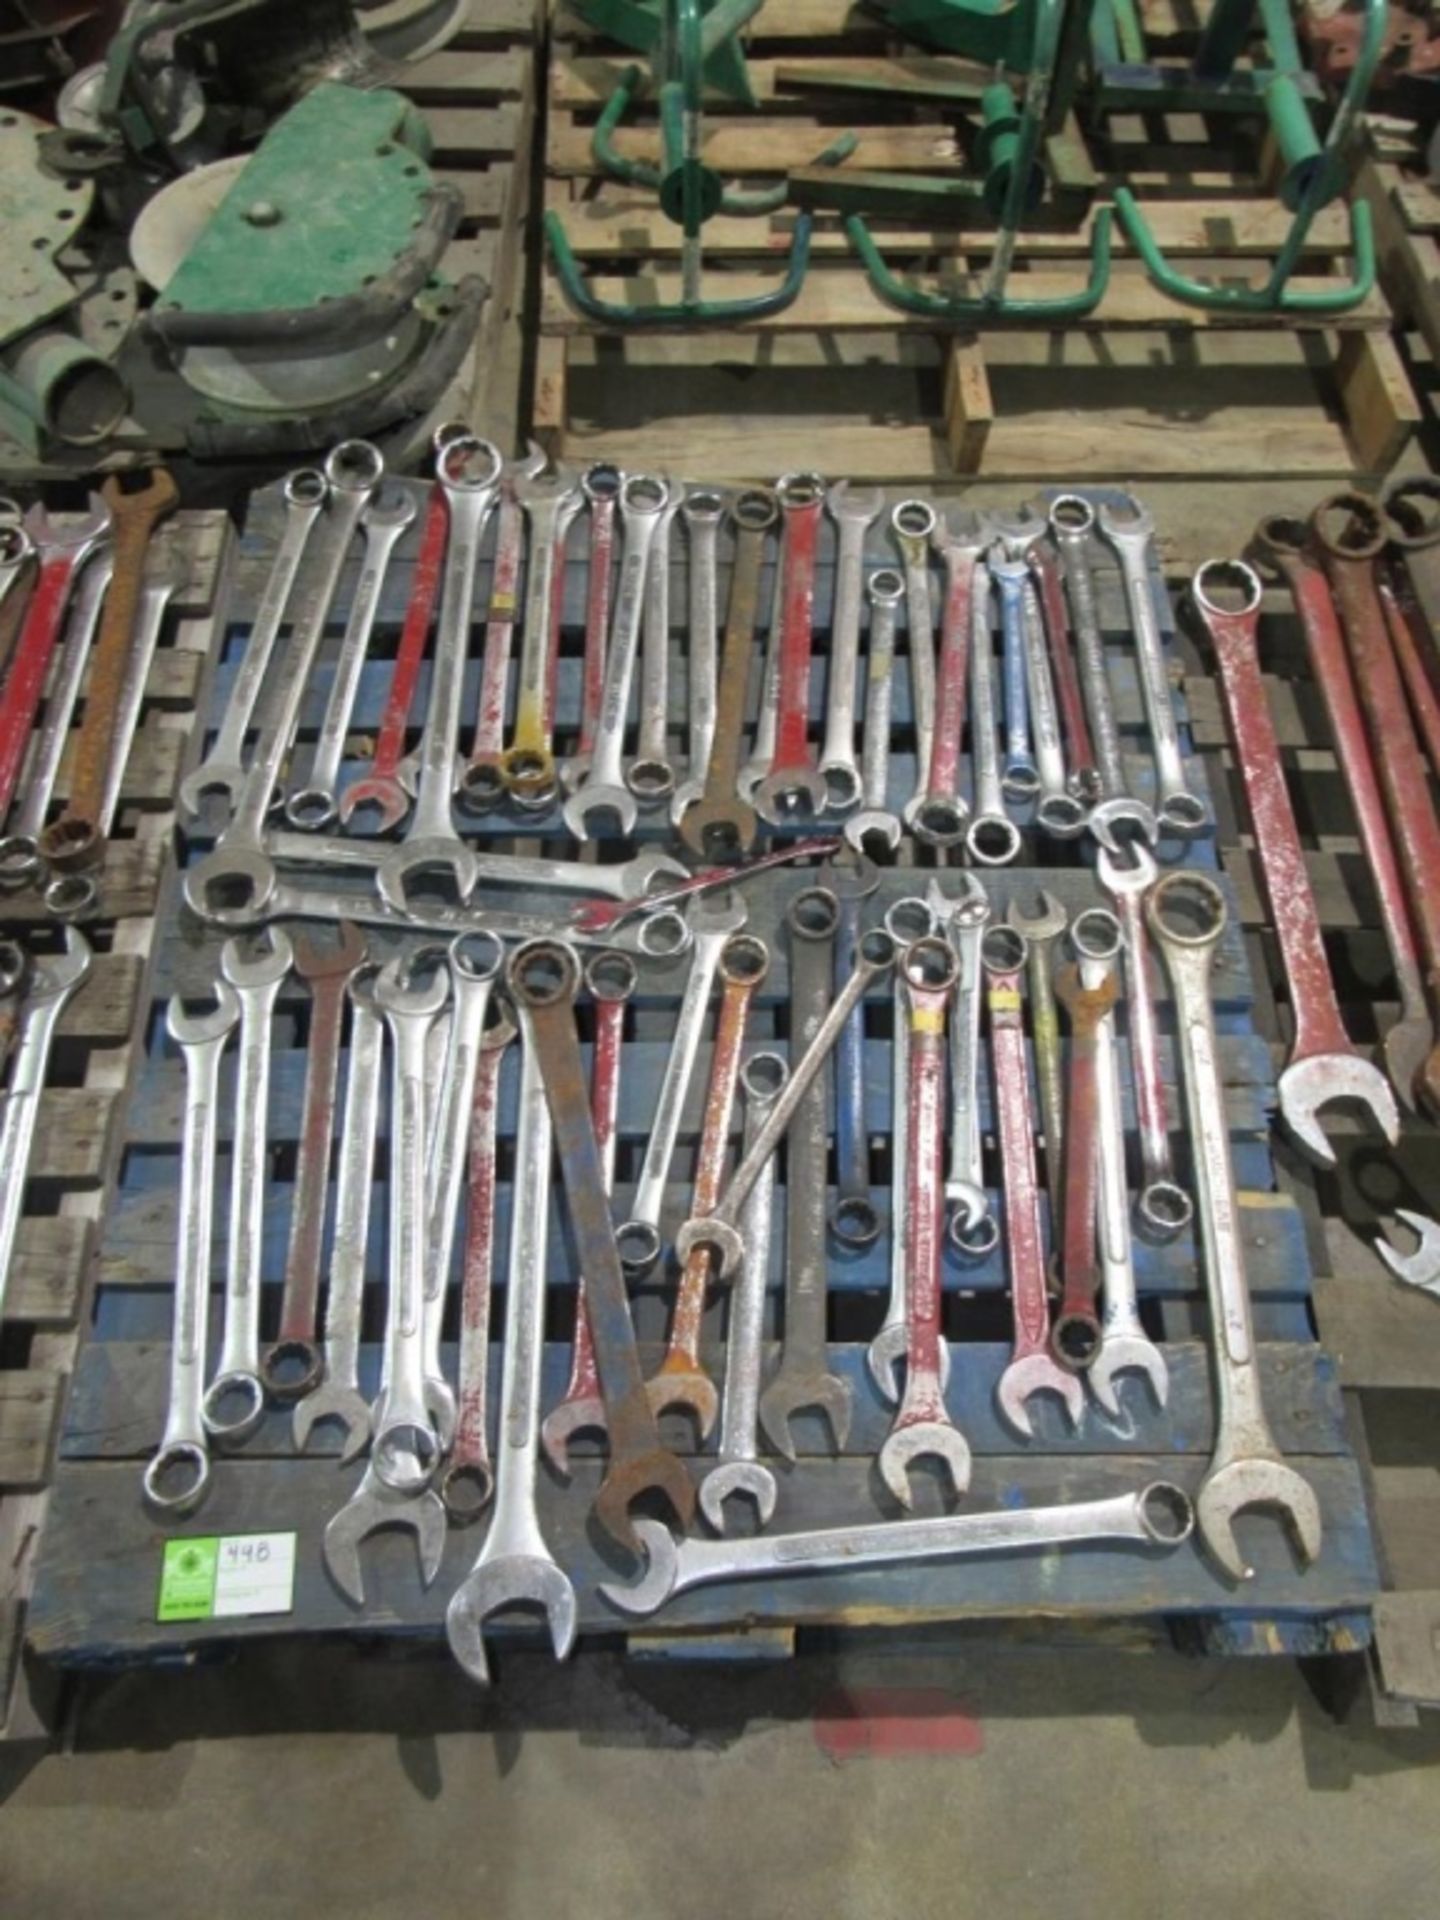 (approx qty - 50) Combo Wrenches-